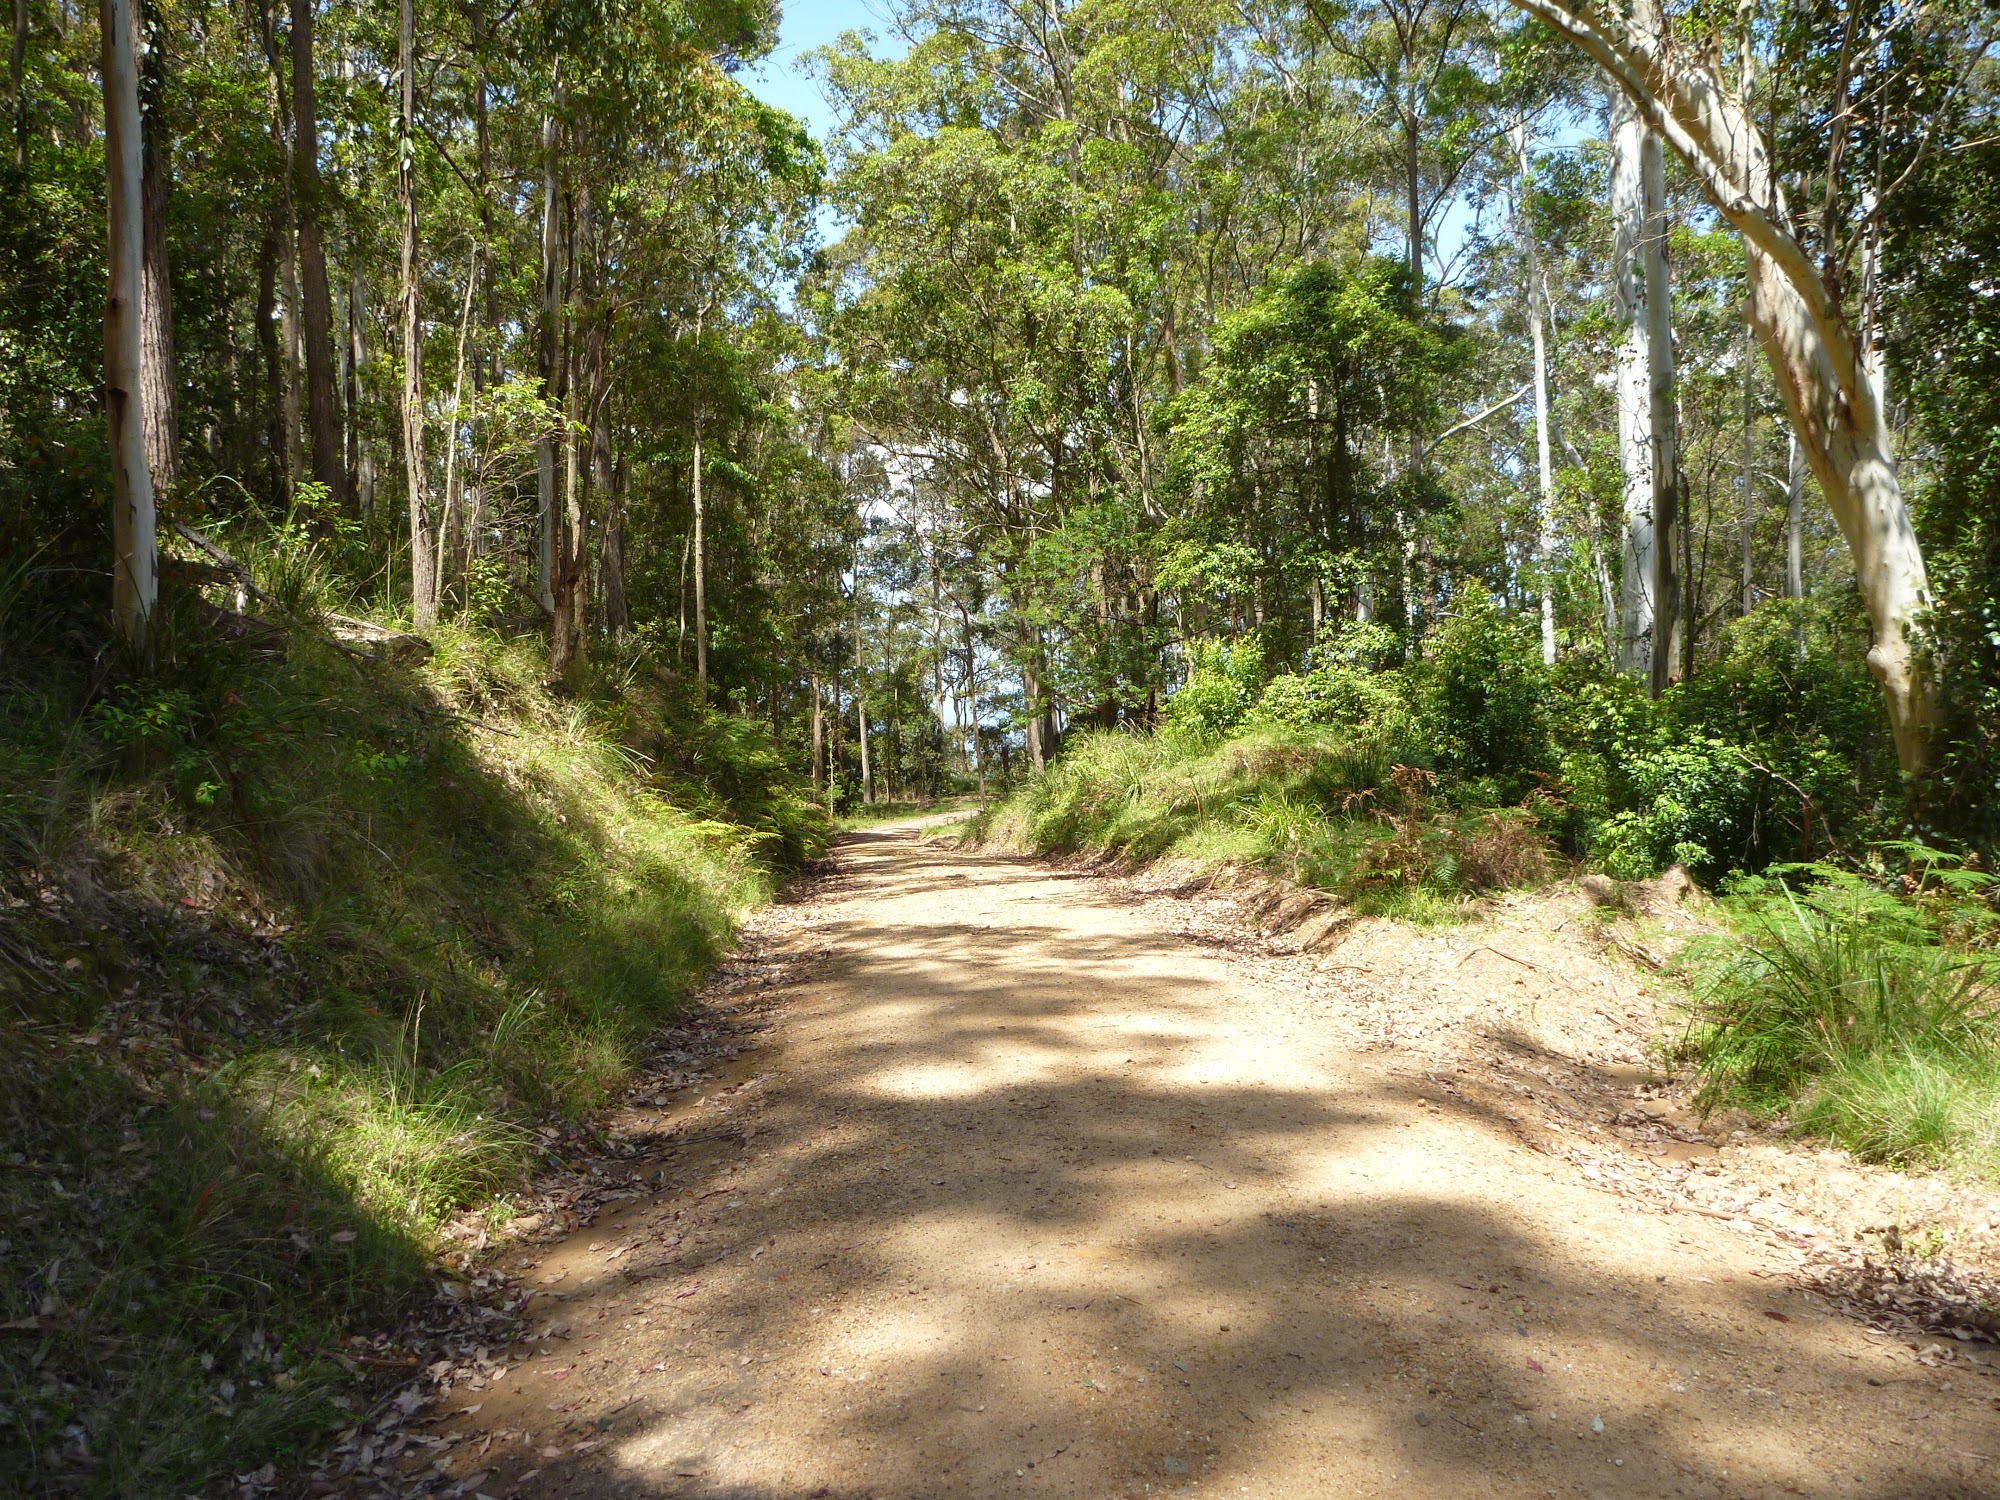 Walking along the road between Heaton Lookout and Tower